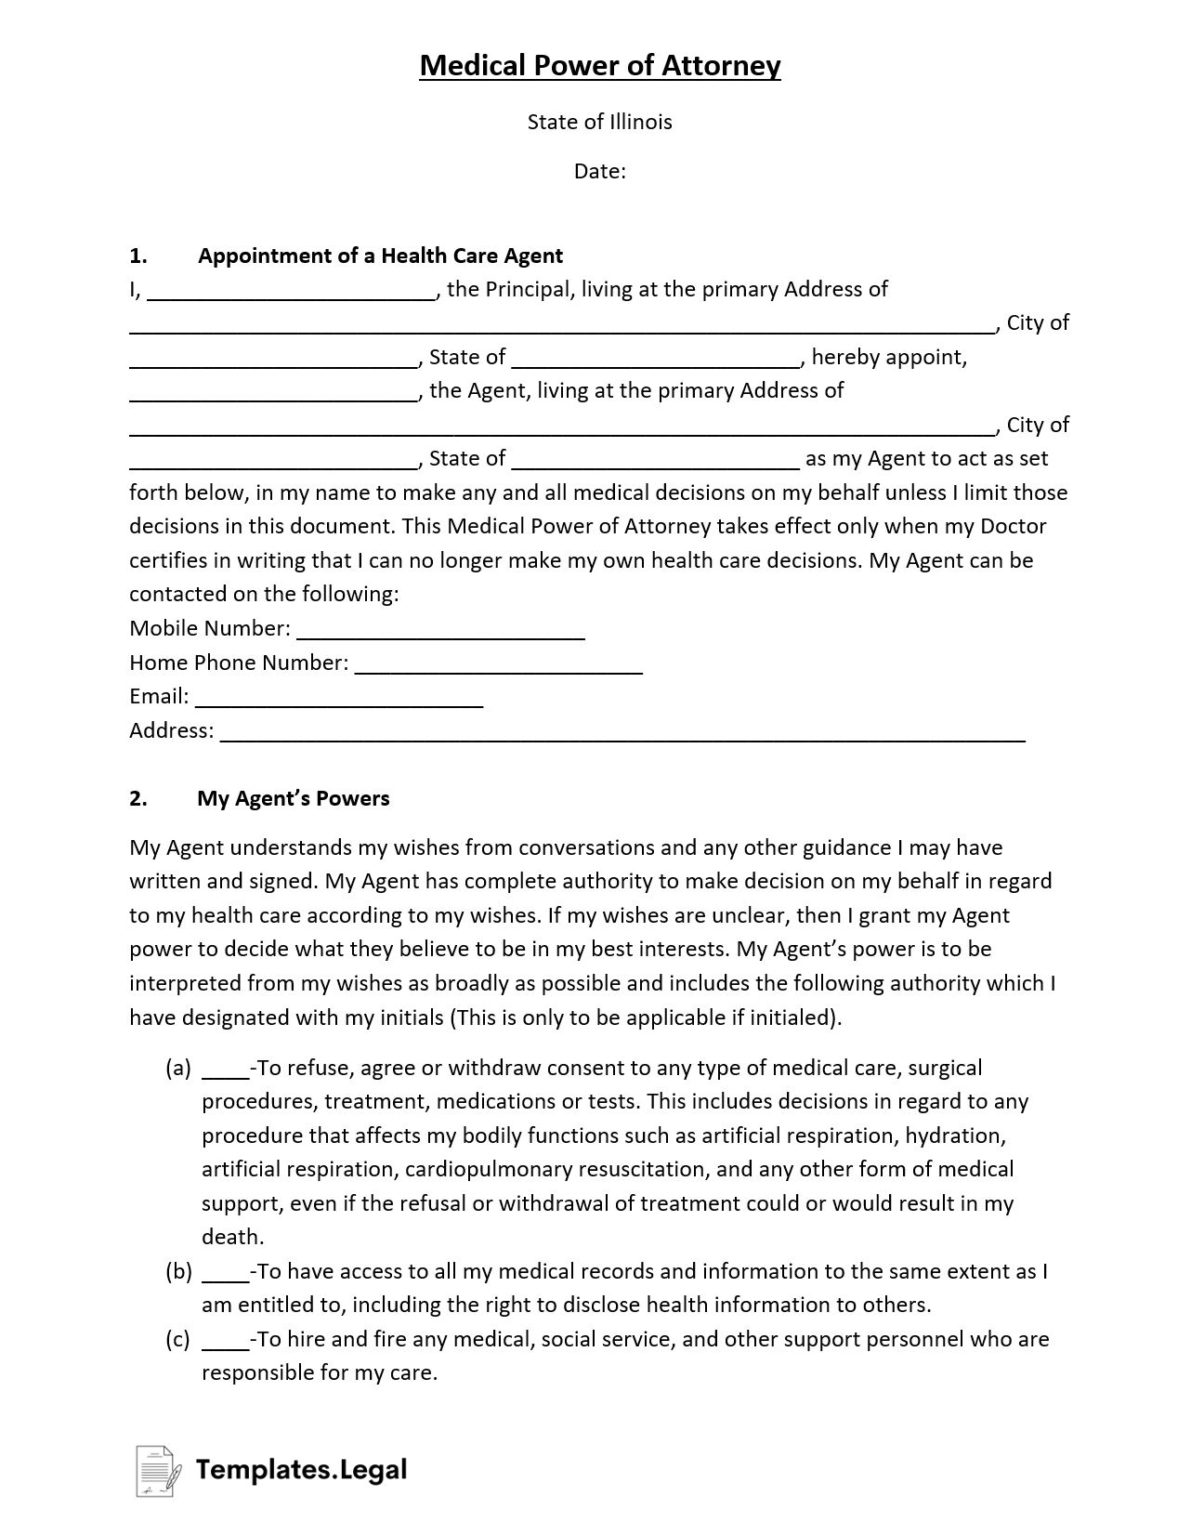 Illinois Power of Attorney Templates (Free) [Word, PDF & ODT]